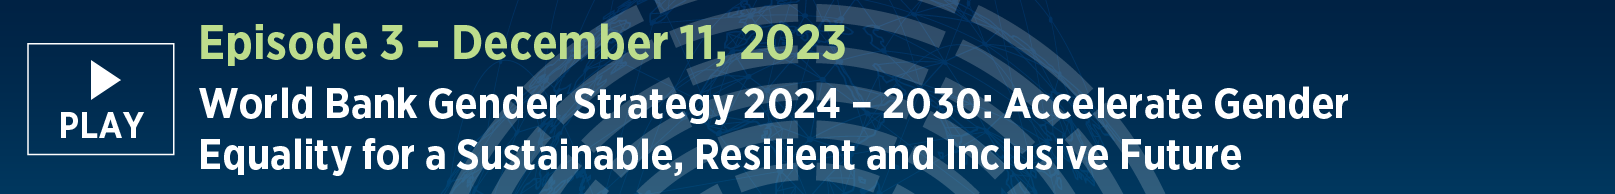 Episode 3: World Bank Gender Strategy 2024-2030: Accelerate Gender Equality for a Sustainable, Resilient and Inclusive Future